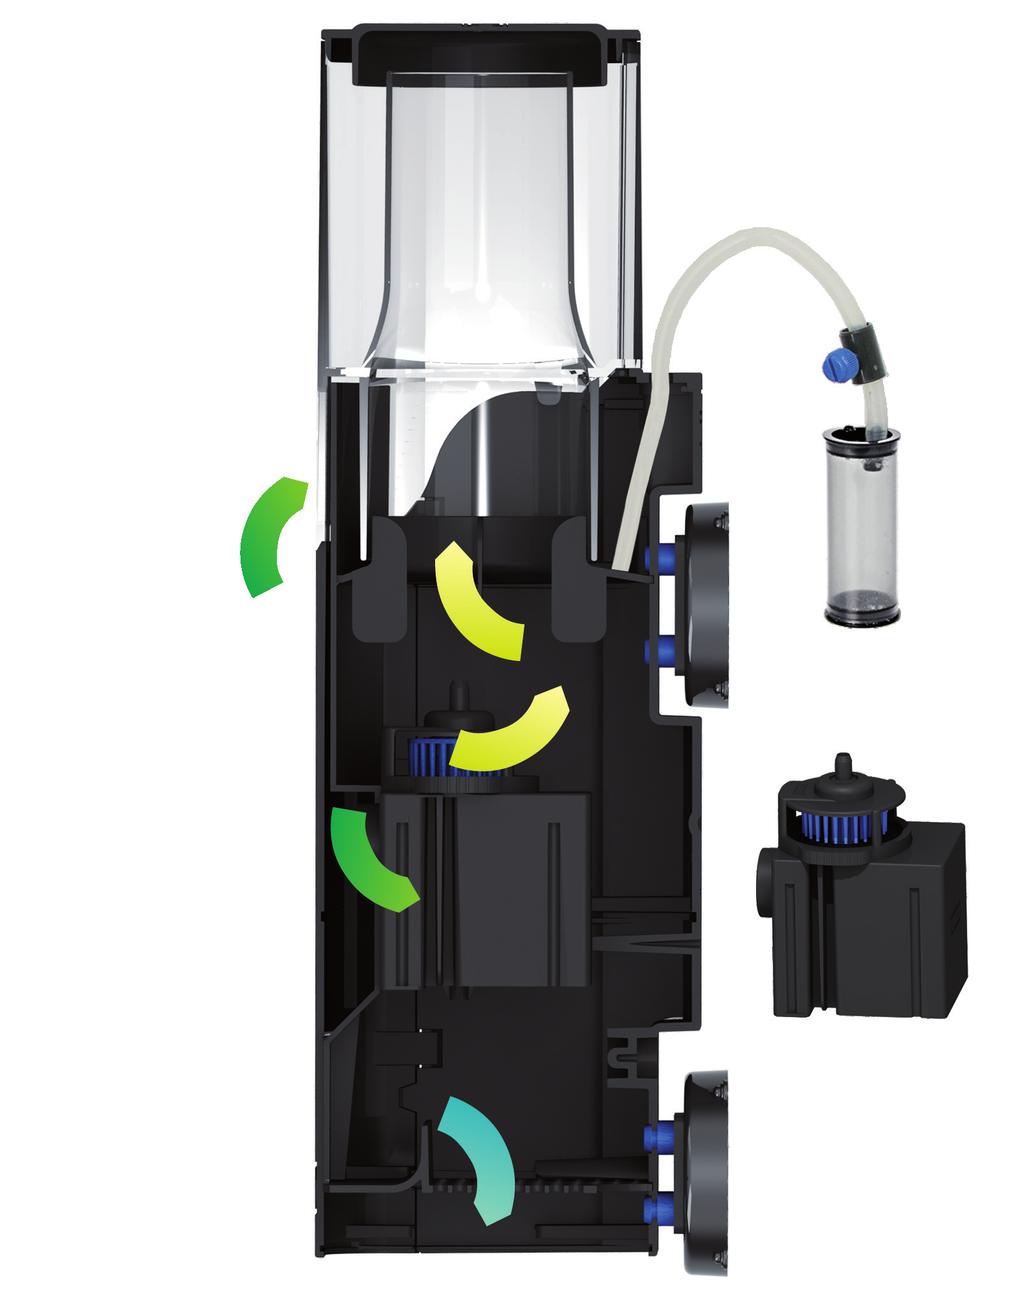 140mm Adaptability to aquaria 215mm Comline DOC Skimmer 9001 9012 415mm The vertical eleganc The Comline DOC Skimmer 9001, an easygoing, simple